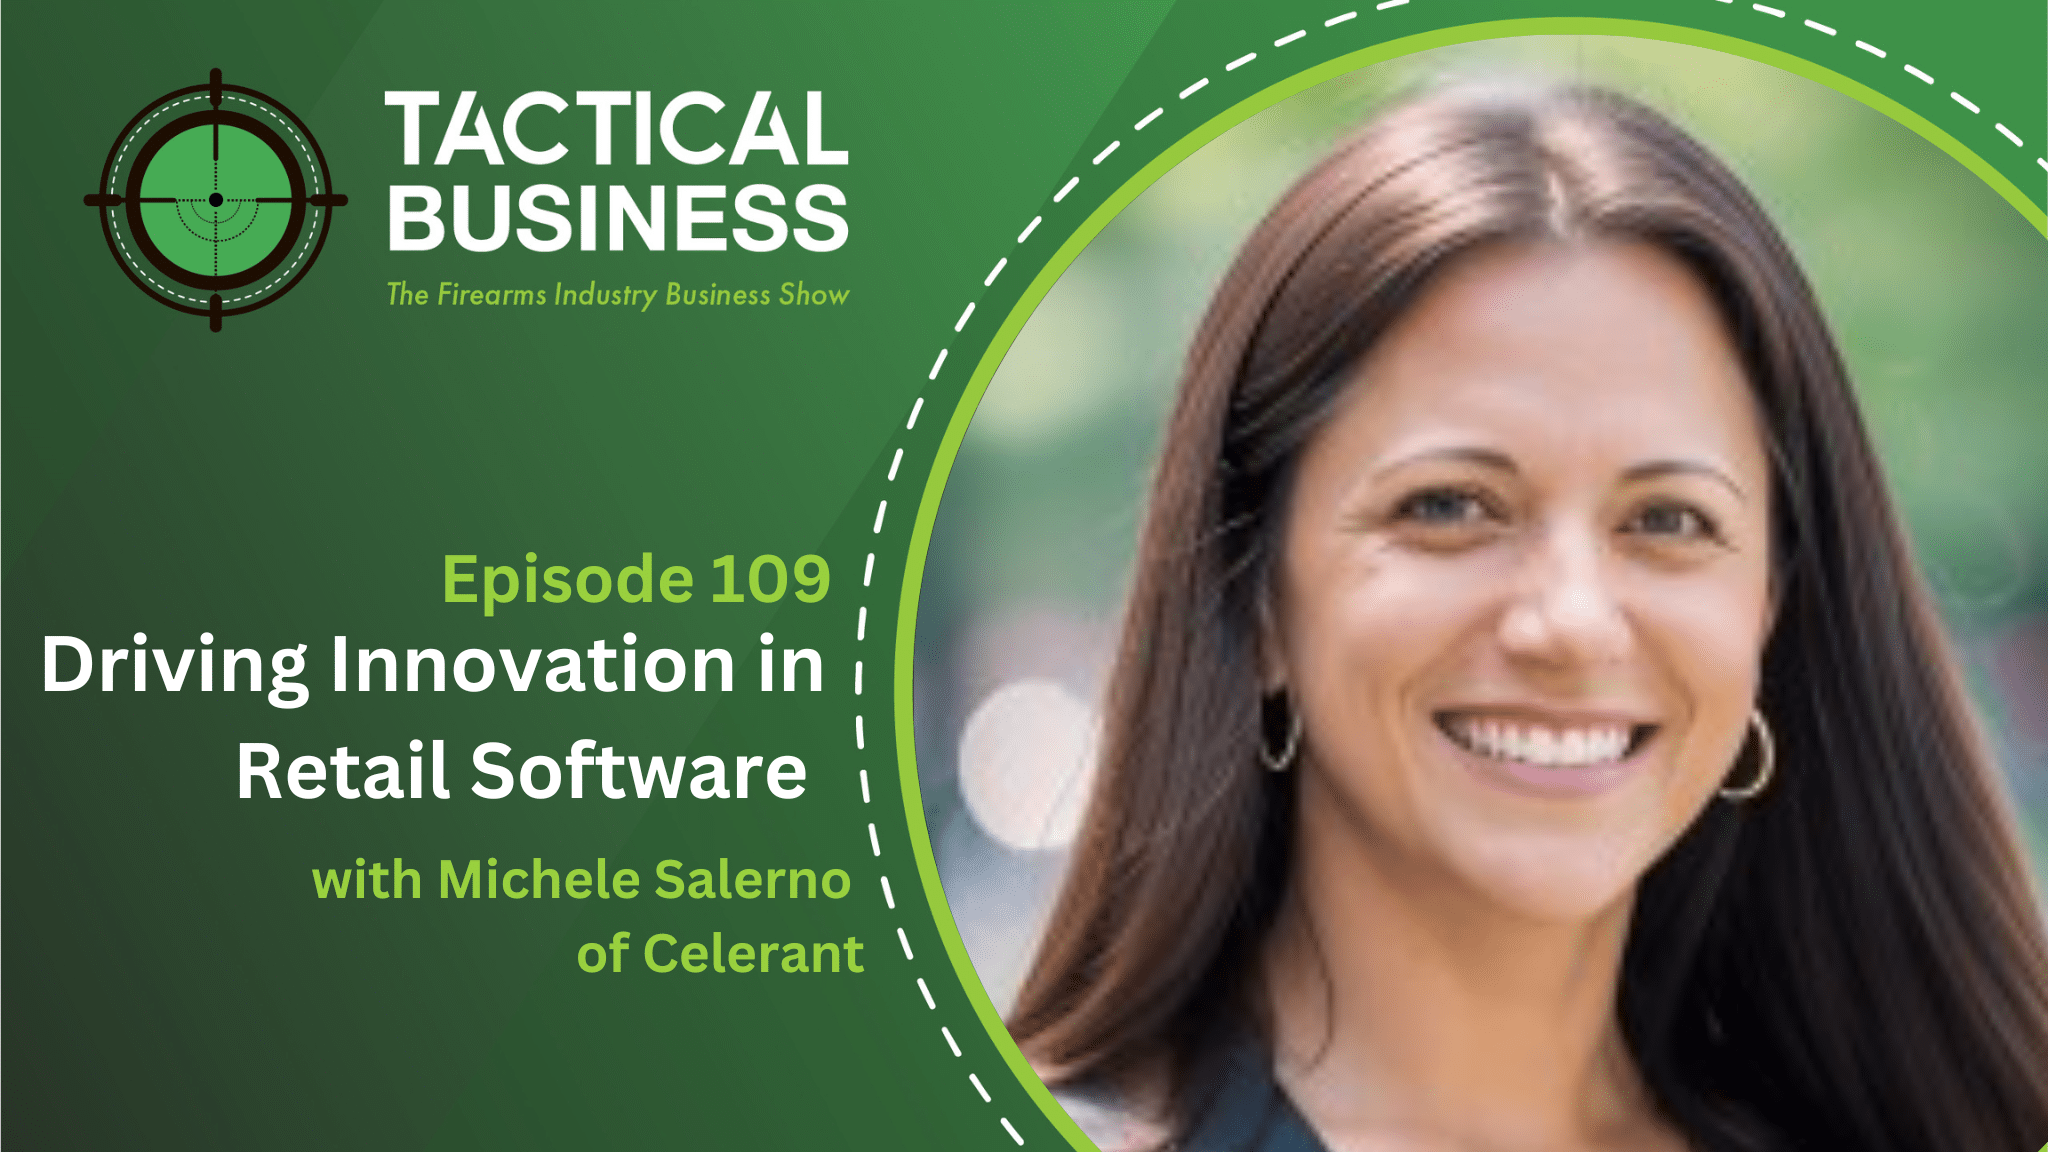 Driving Innovation in Retail Software with Michele Salerno of Celerant